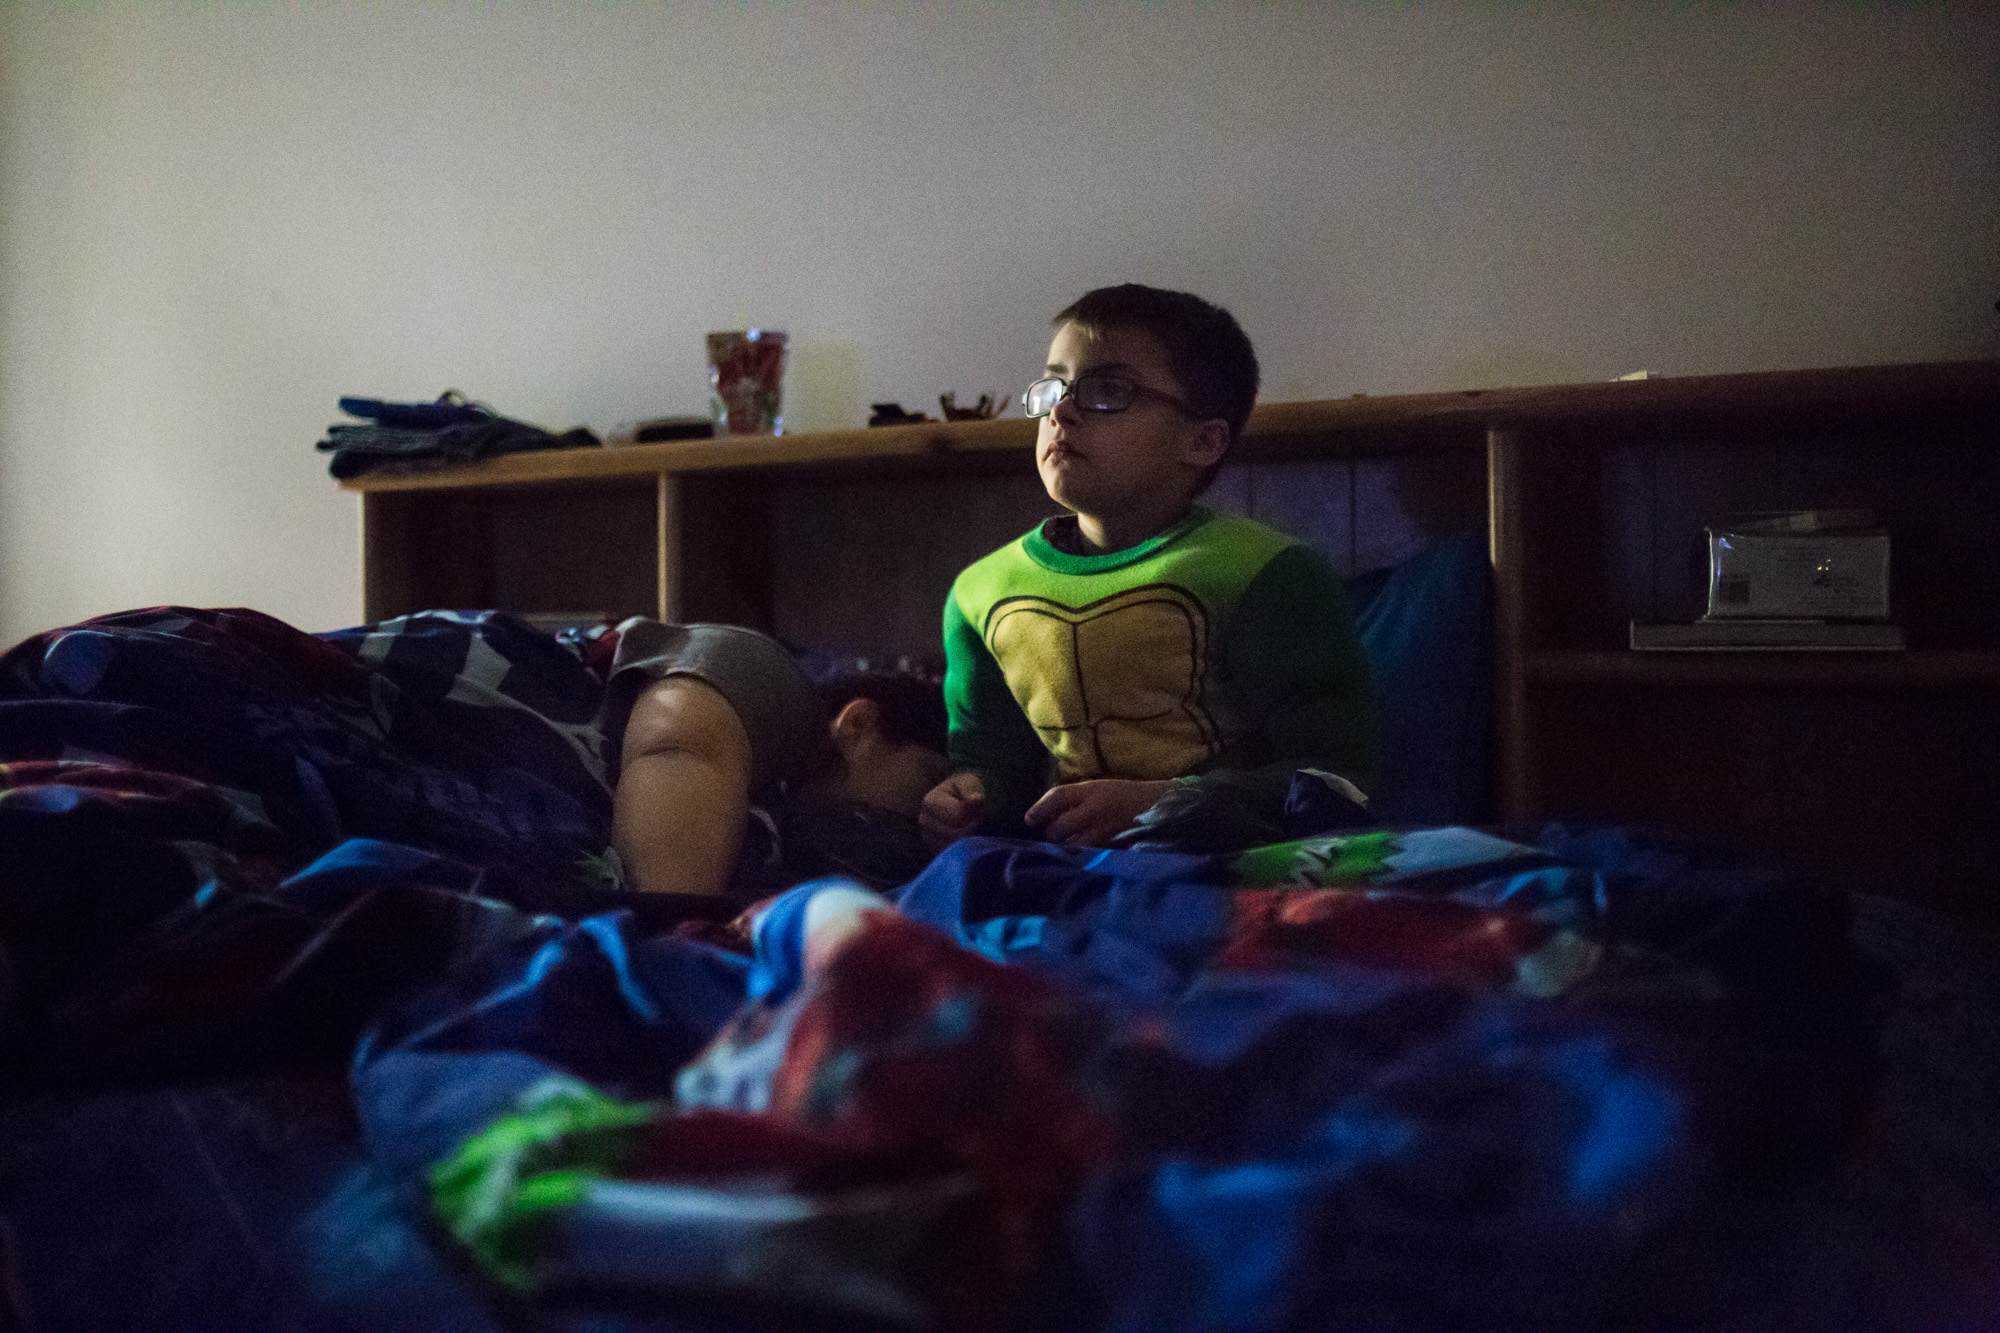  Bettina falls asleep while Treven watches Jumanji to calm down. Being a night owl, Treven needs medication to fall asleep, and his mom usually hugs him while watching a movie in his room to help him relax. 